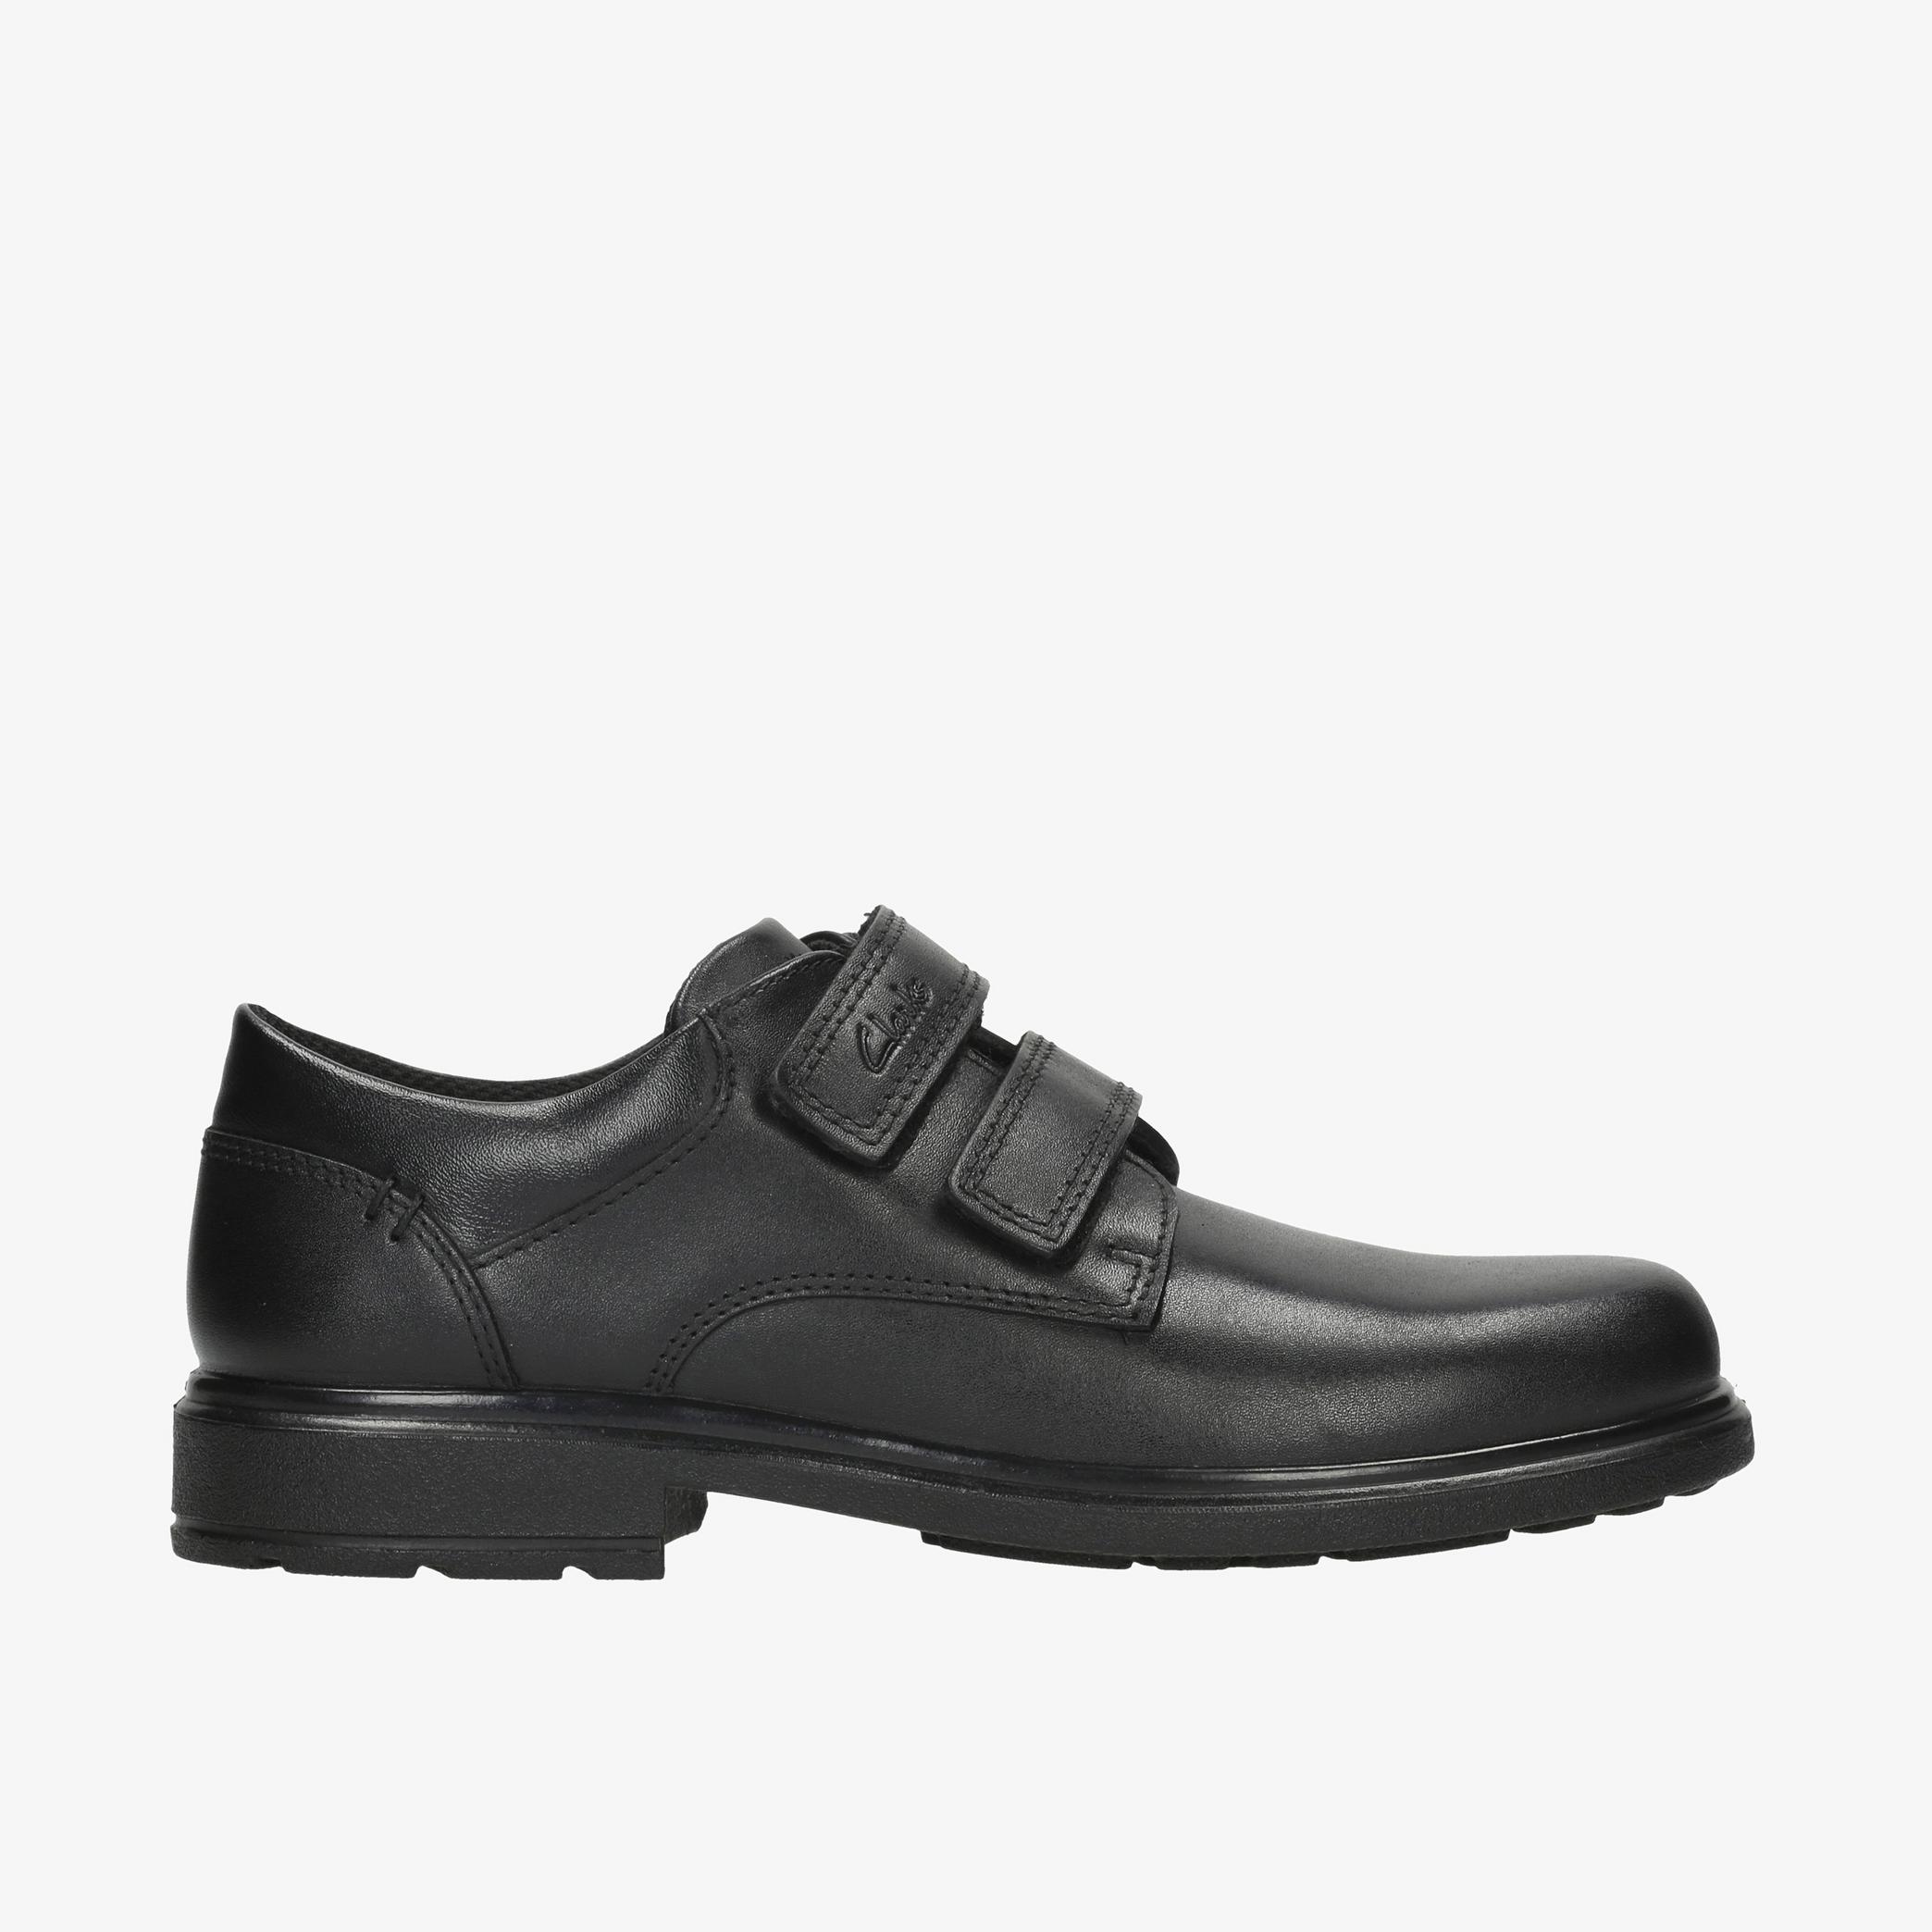 Remi Pace Youth Black Leather Shoes, view 1 of 6